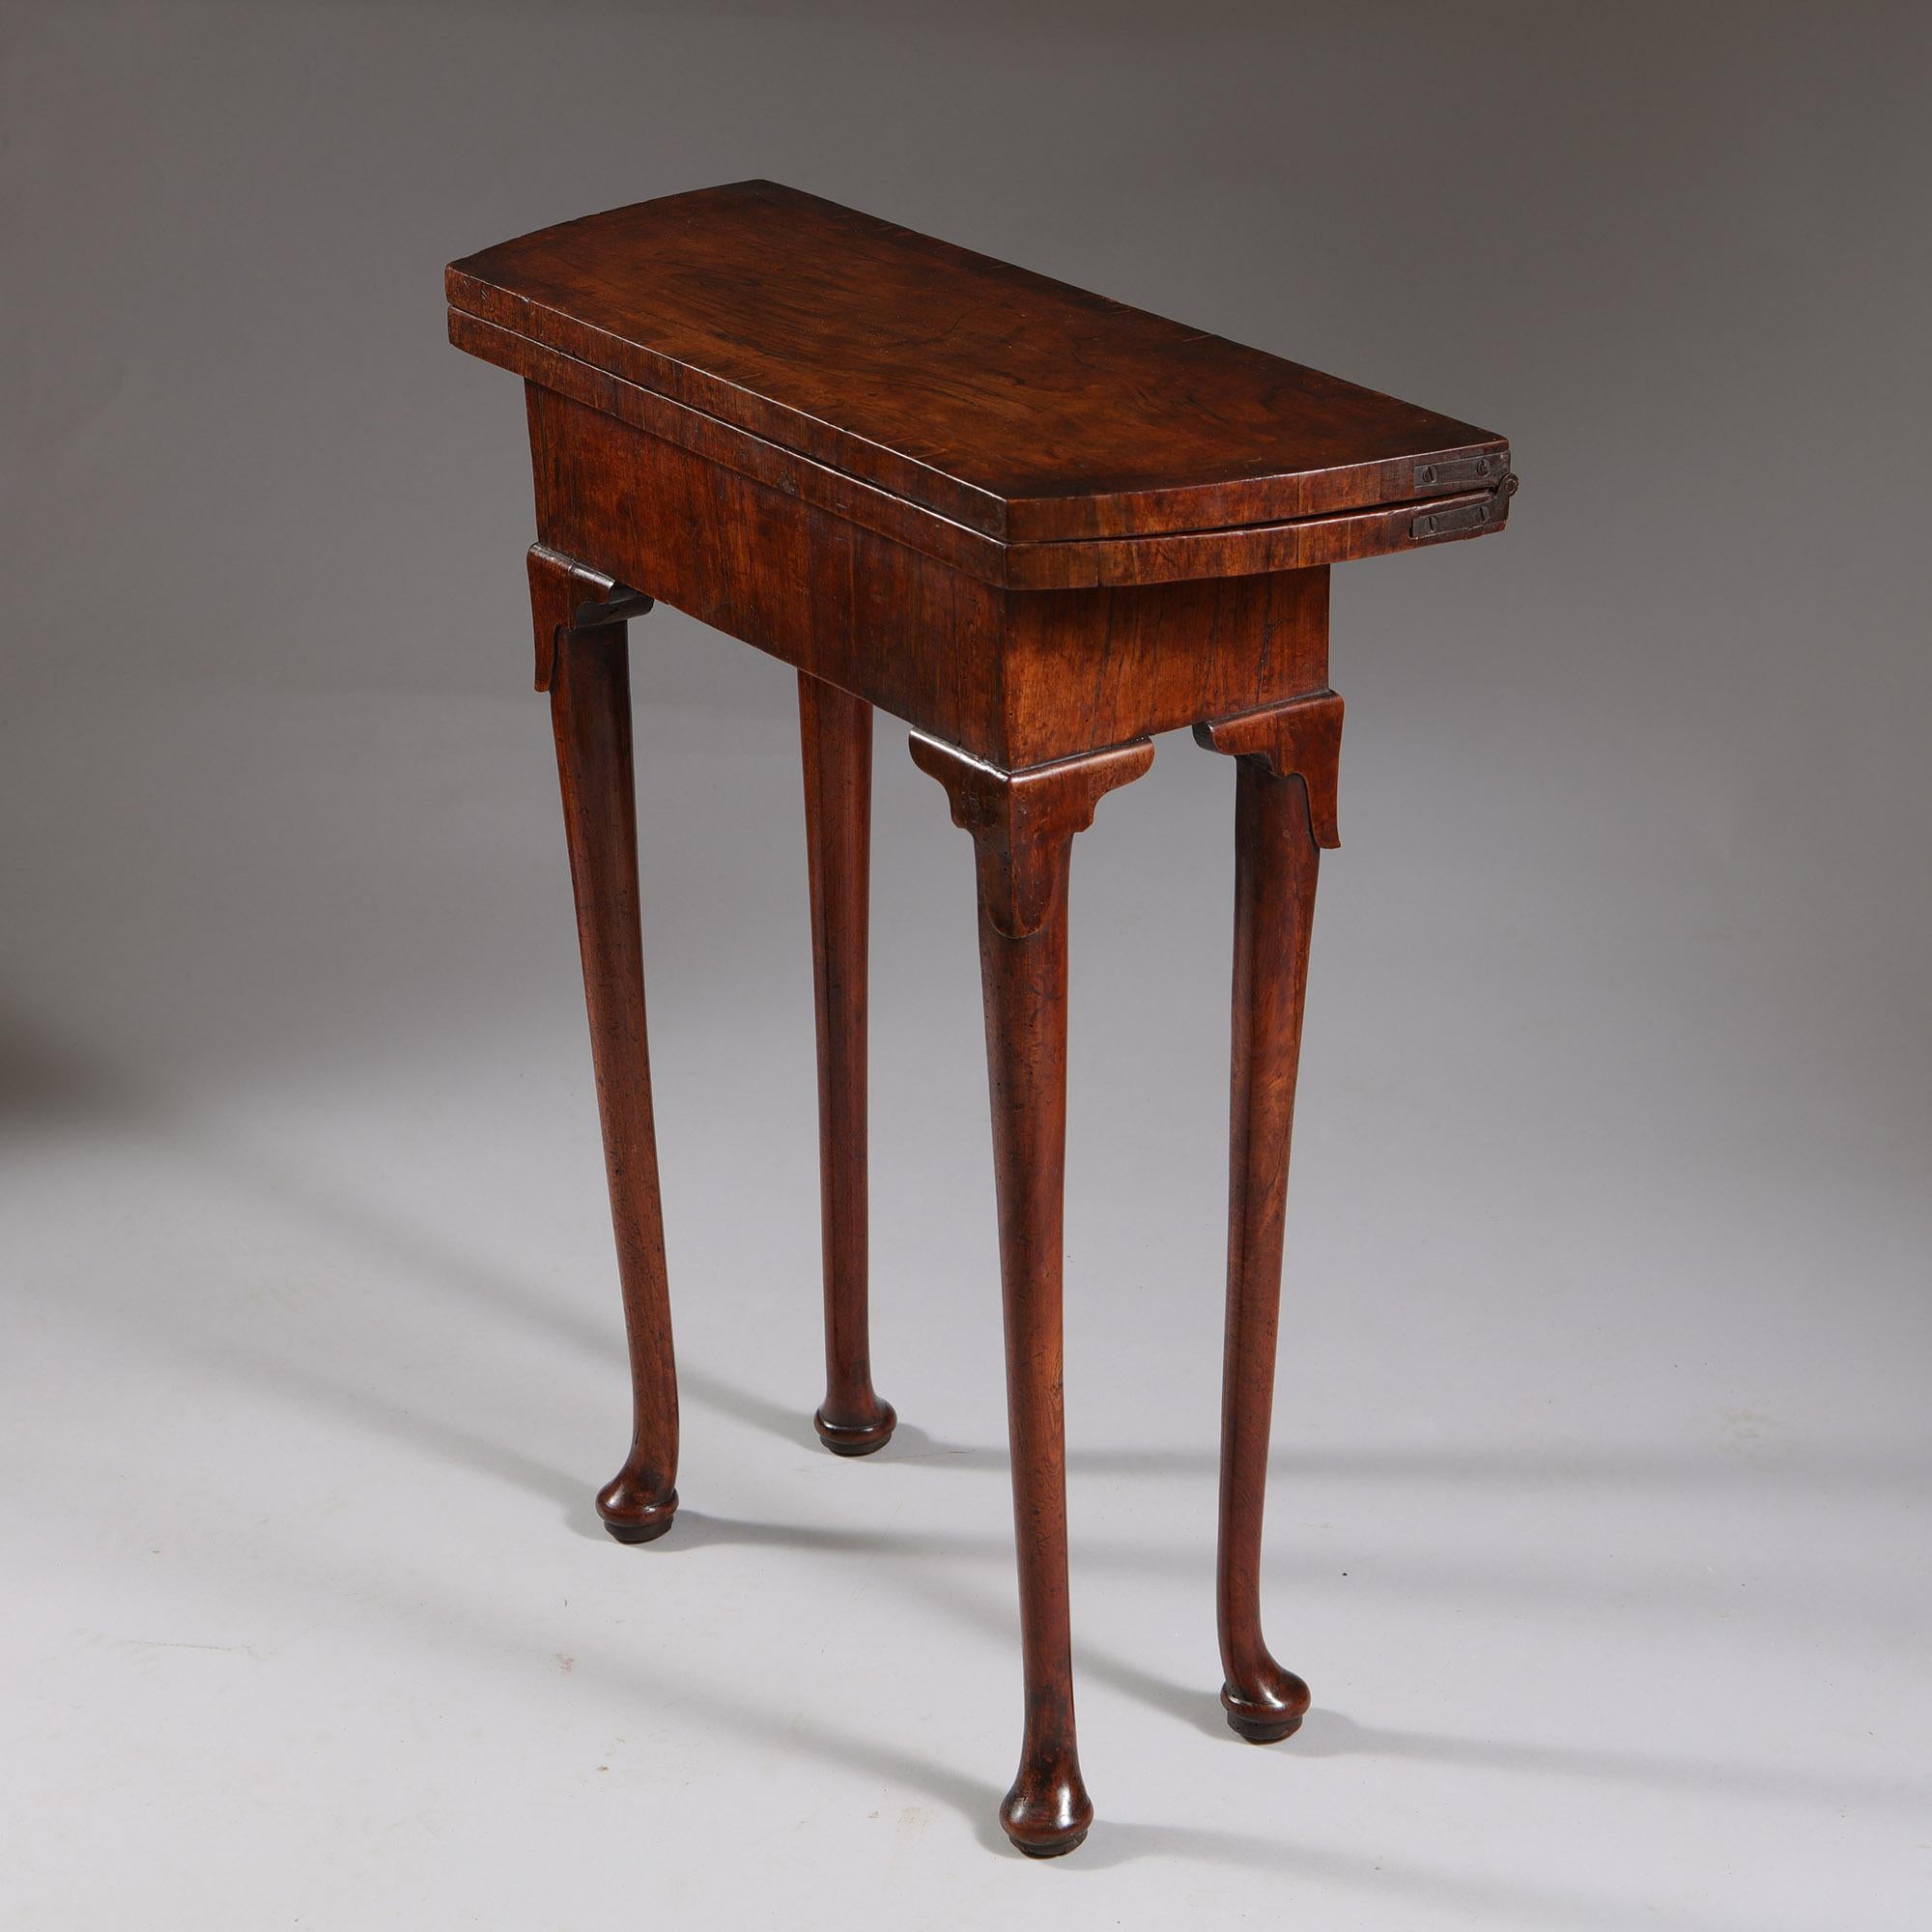 A Unique Early 18th Century Diminutive George I Figured Walnut Bachelors Table For Sale 1